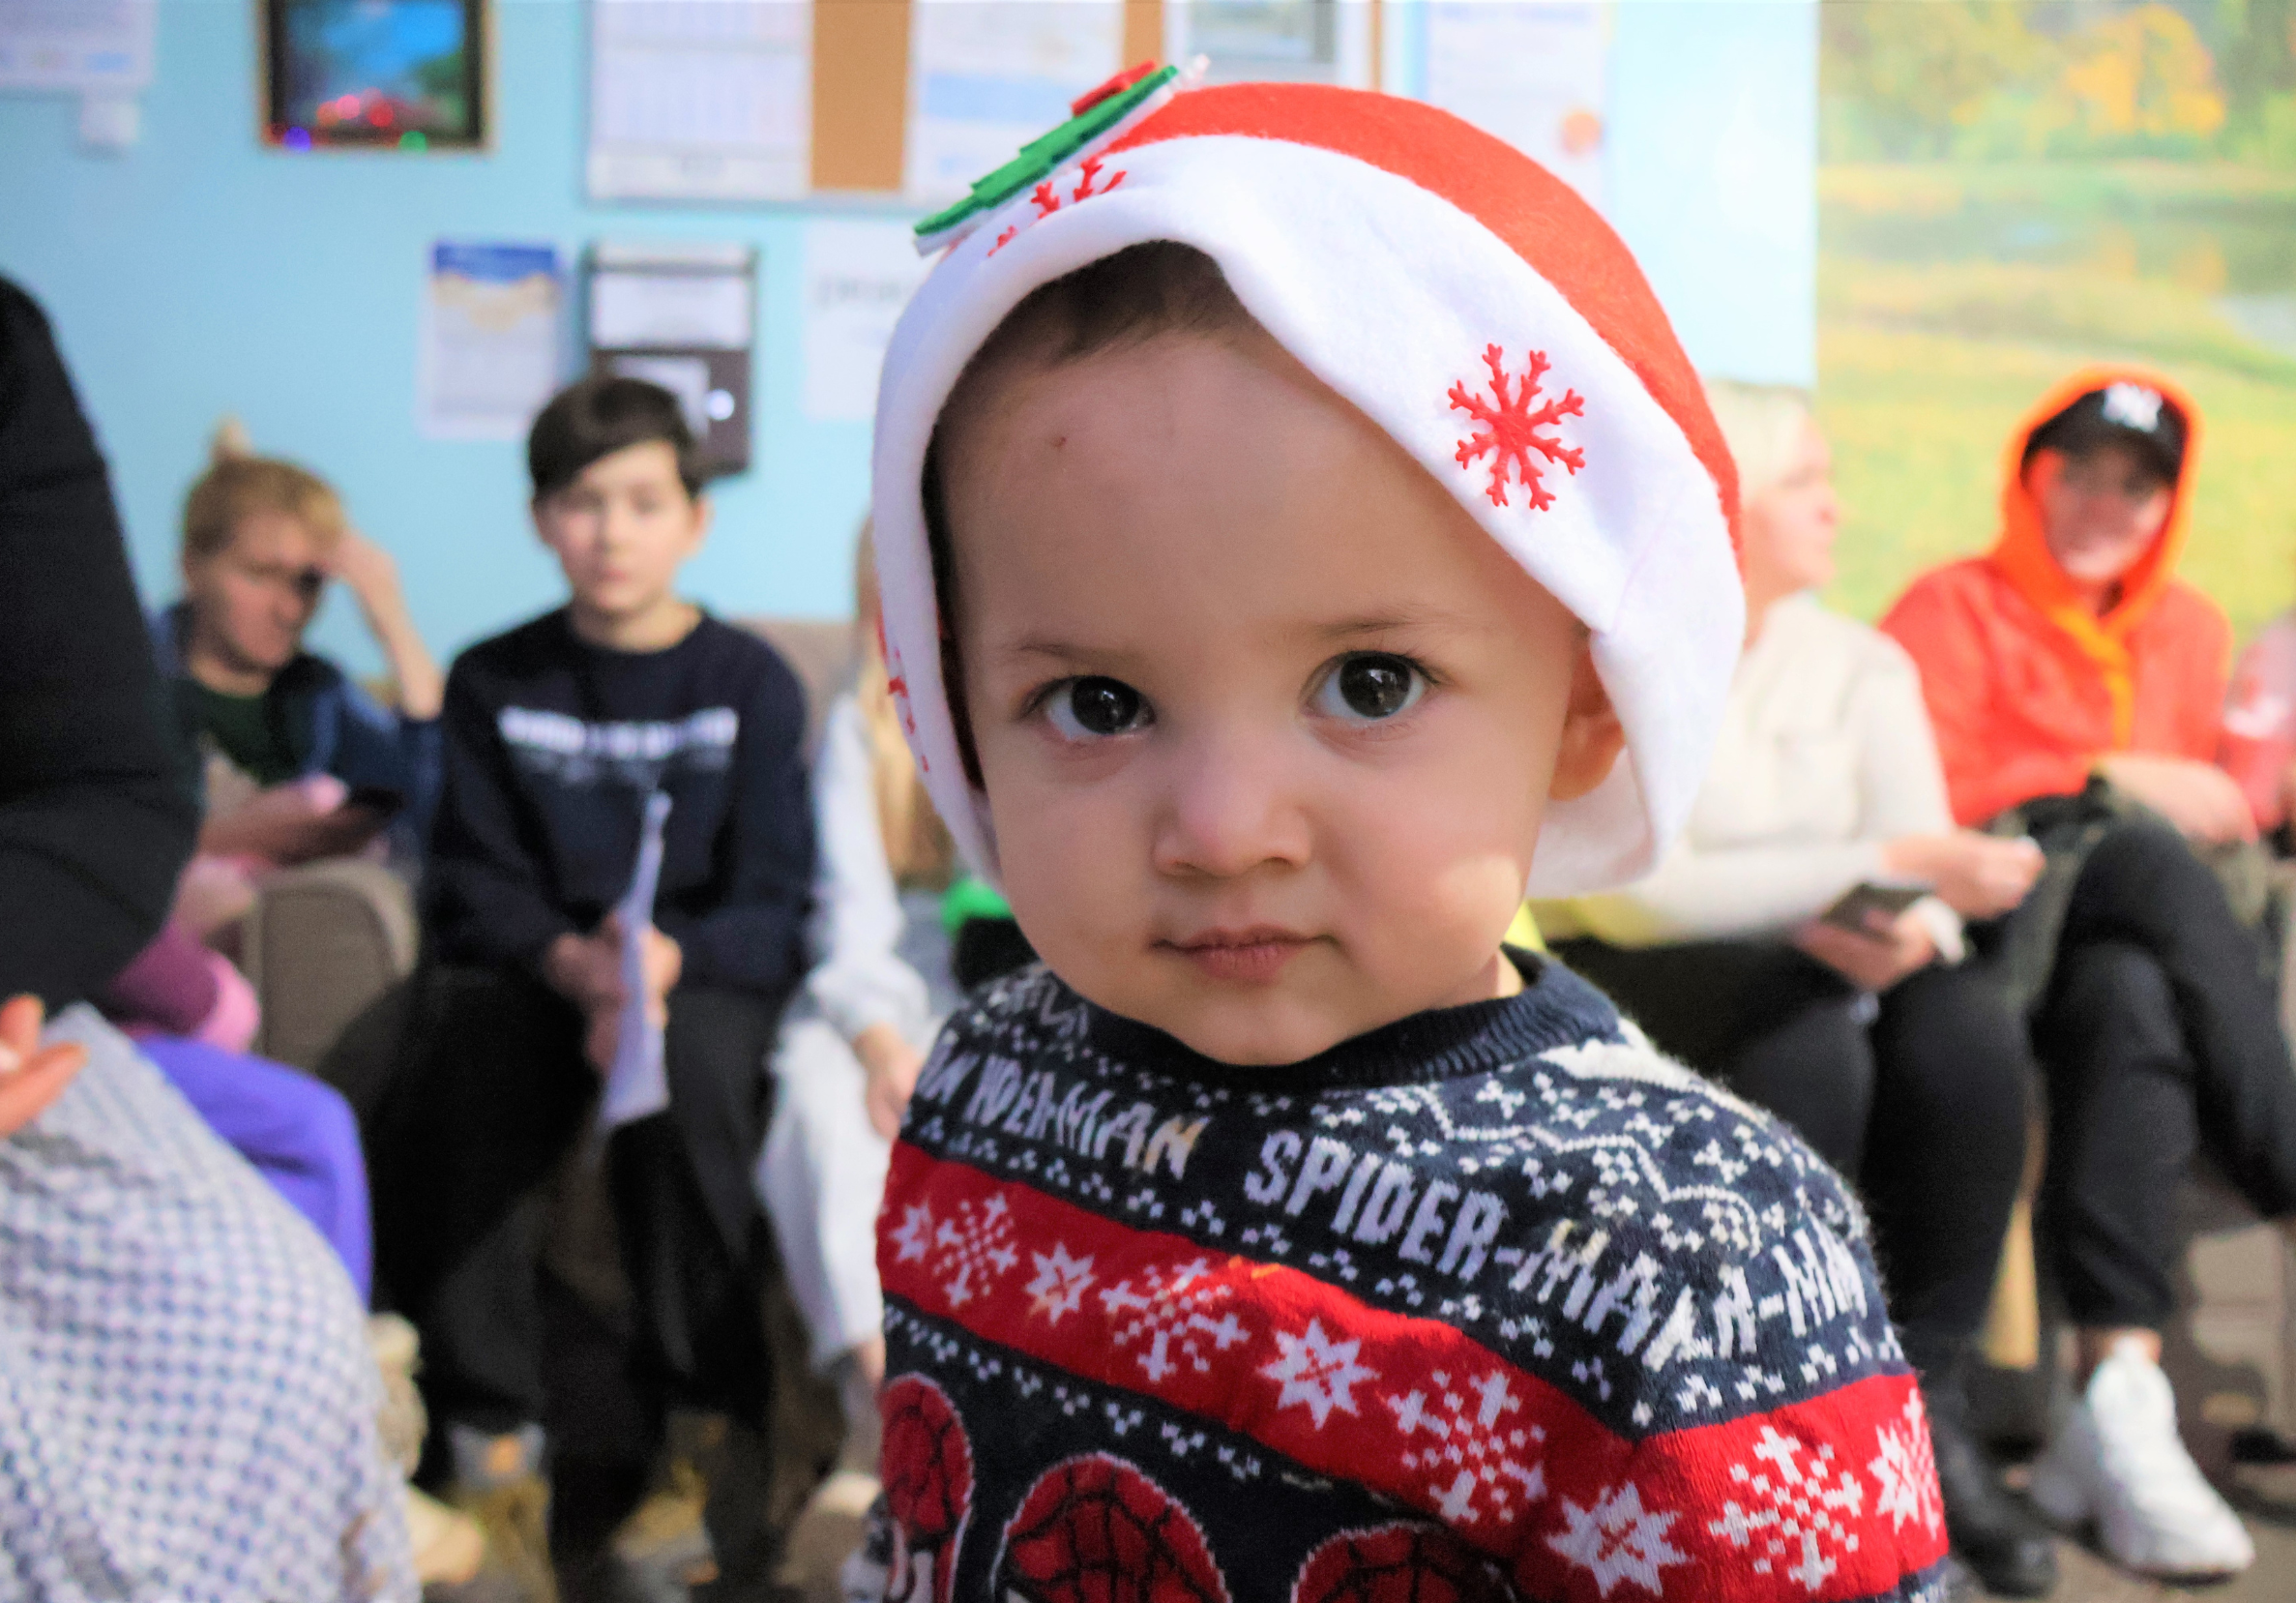 Image is of a young children in a Santa hat and Christmas jumper